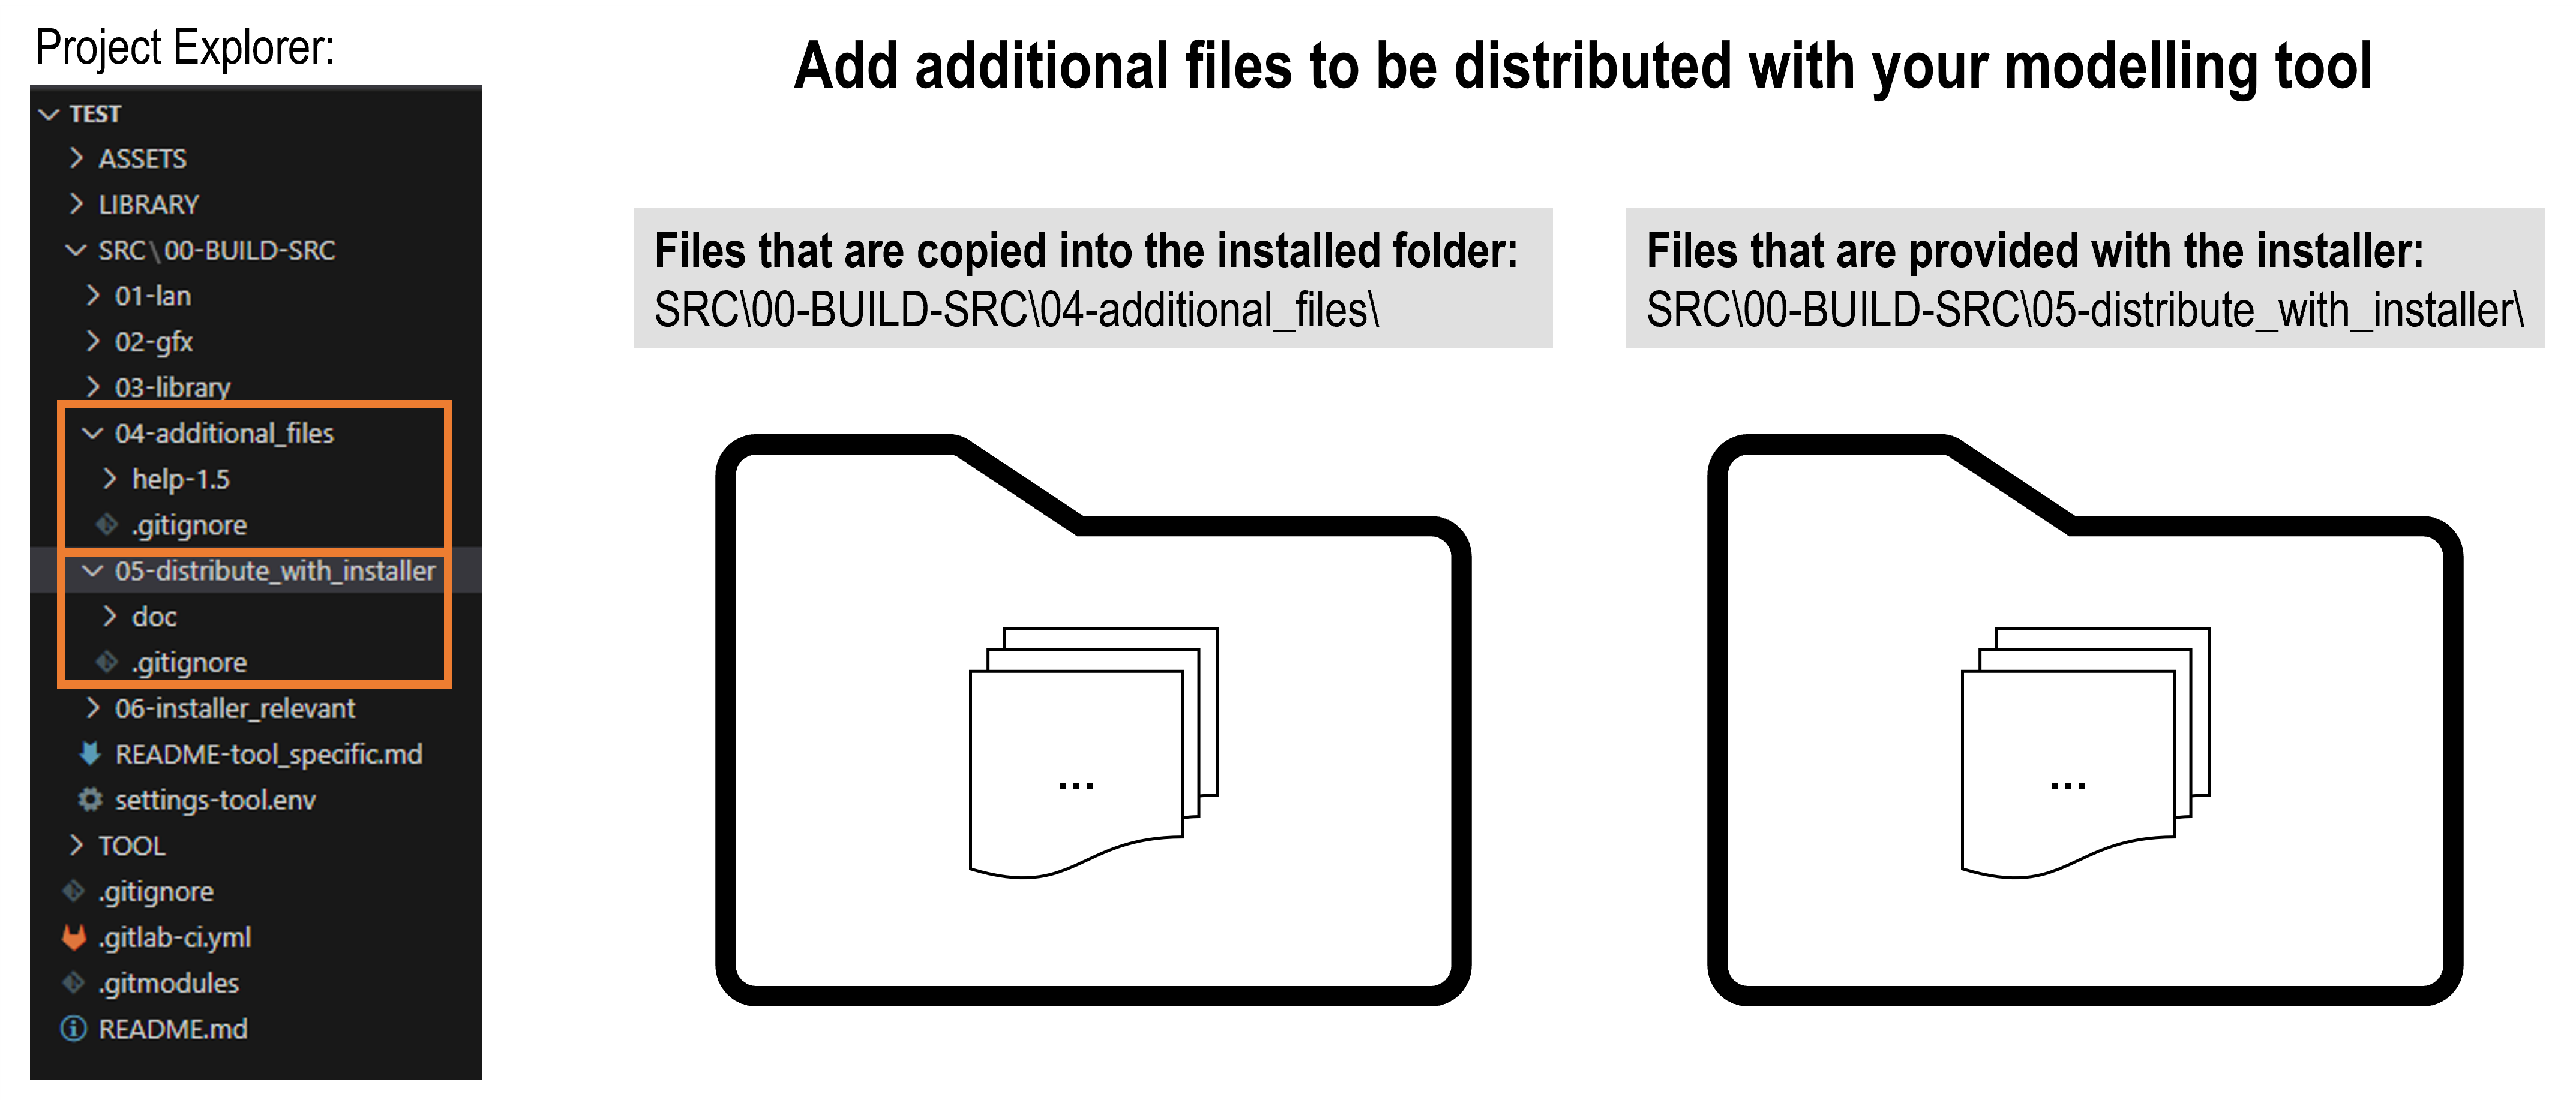 Graphic for visualising optional step on how to add additional files to the modelling tool